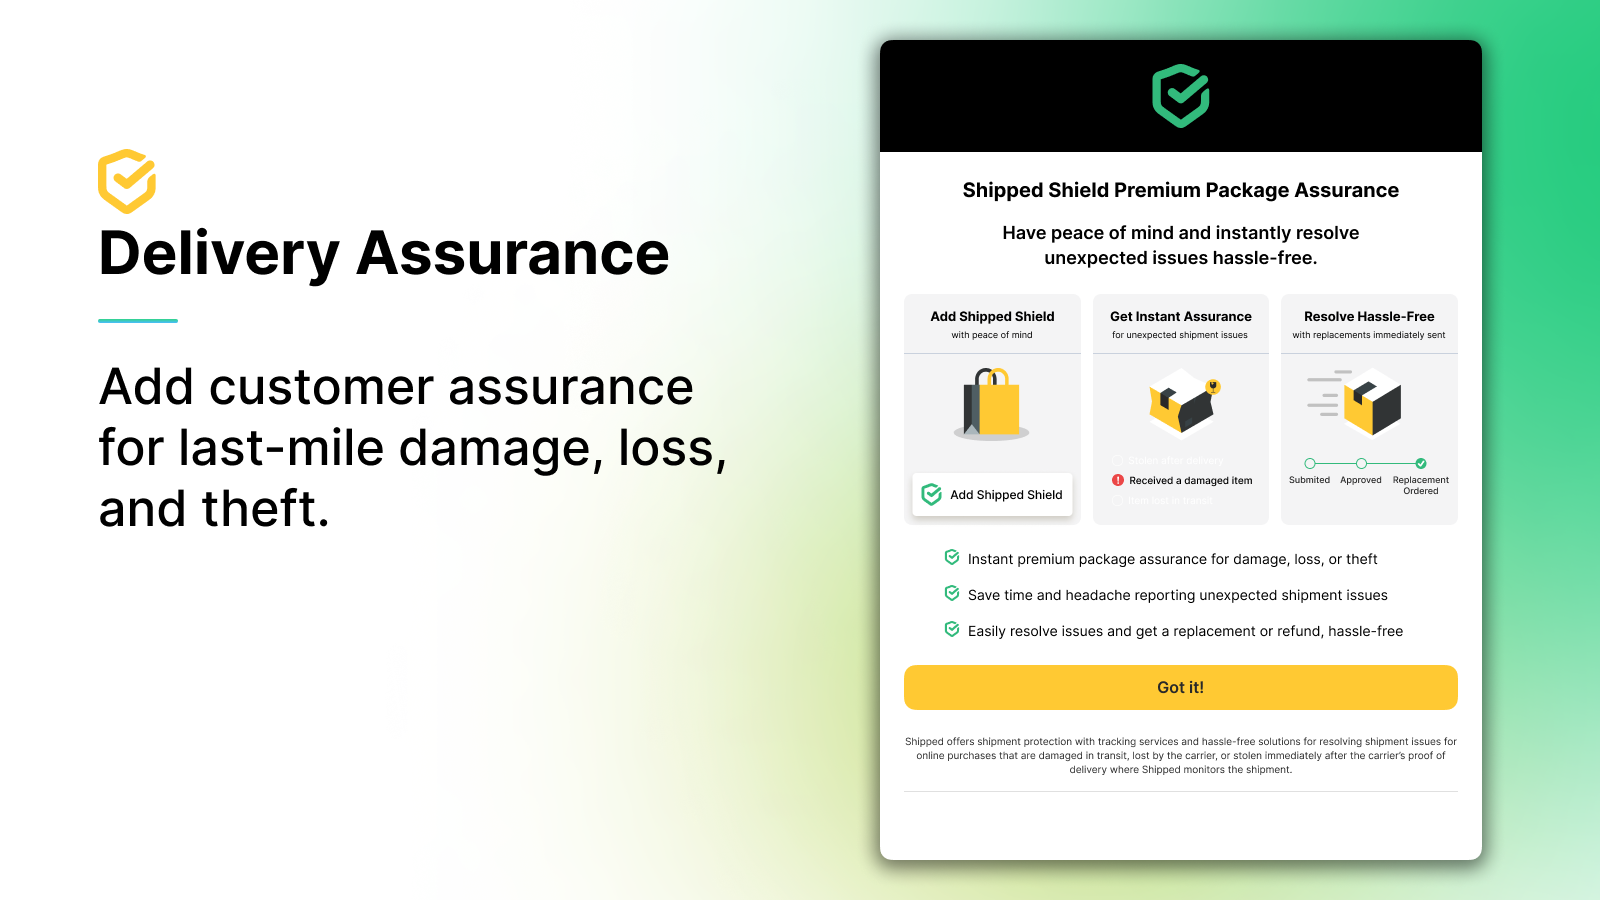 Add customer assurance for last-mile damage, loss, and theft